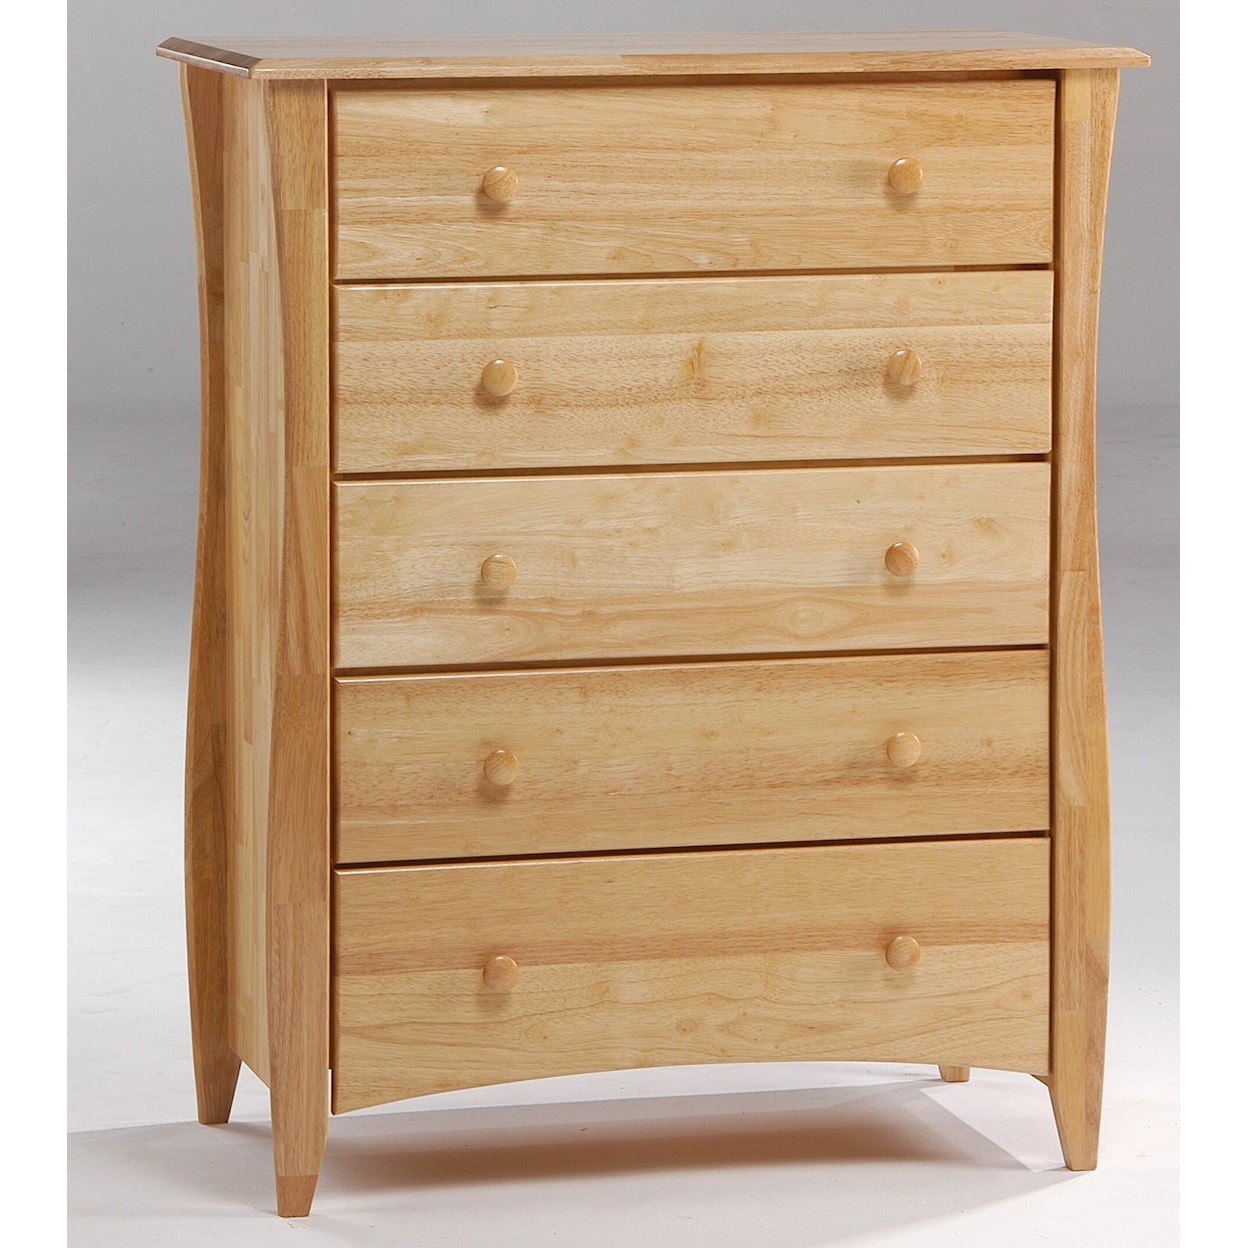 Night & Day Furniture Spice Drawer Chest